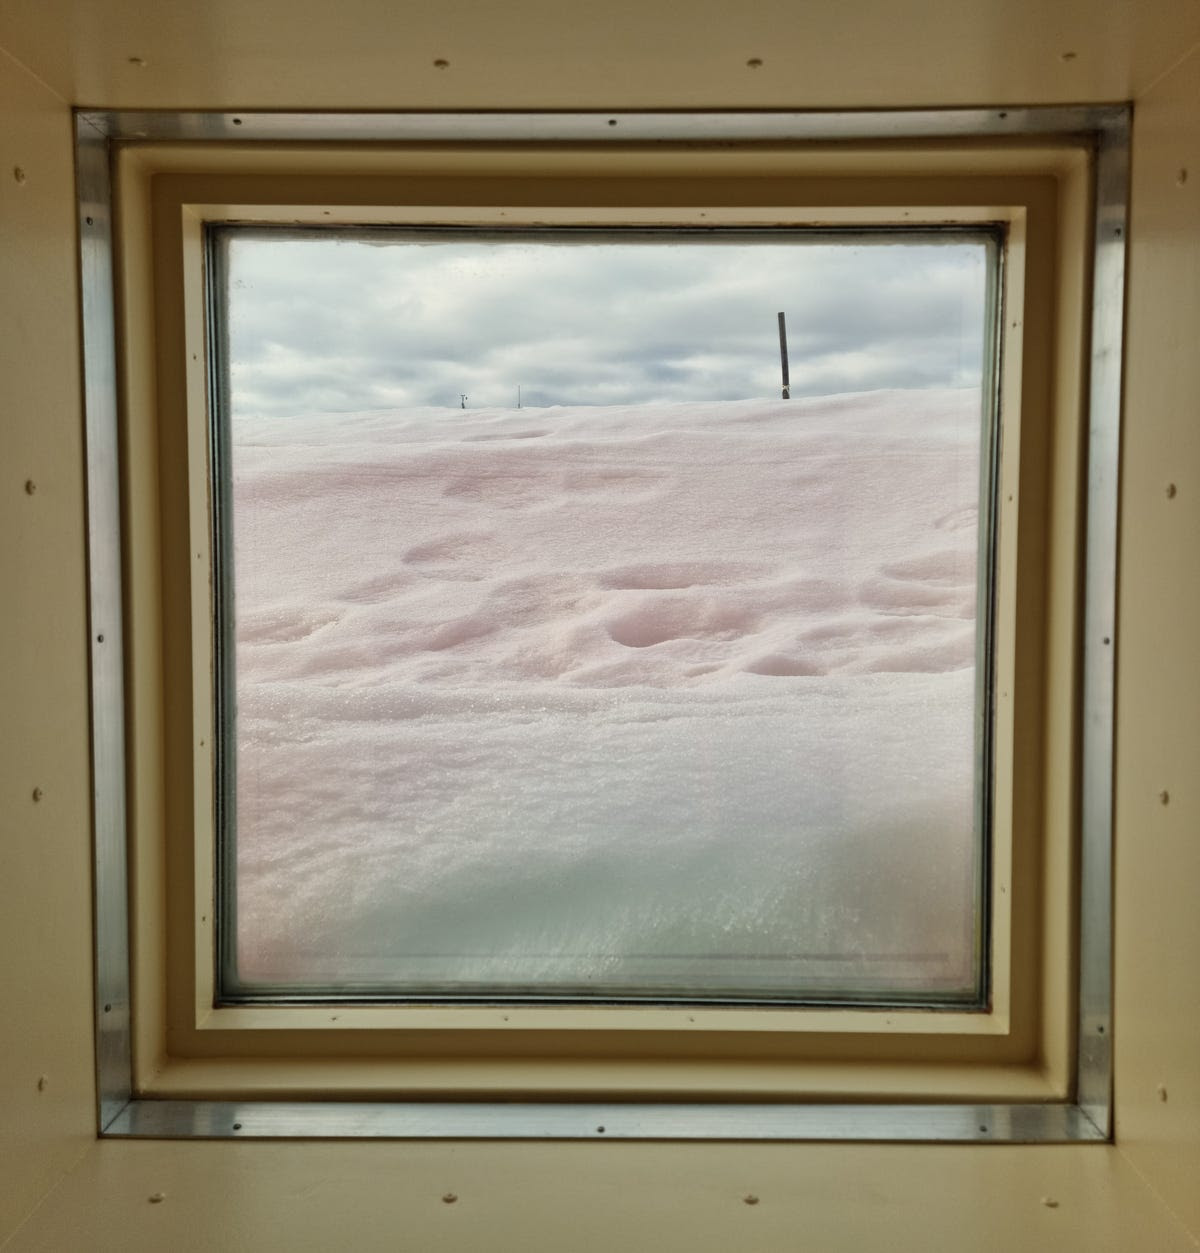 Looking through a window into a buildup of snow, which obscures the view